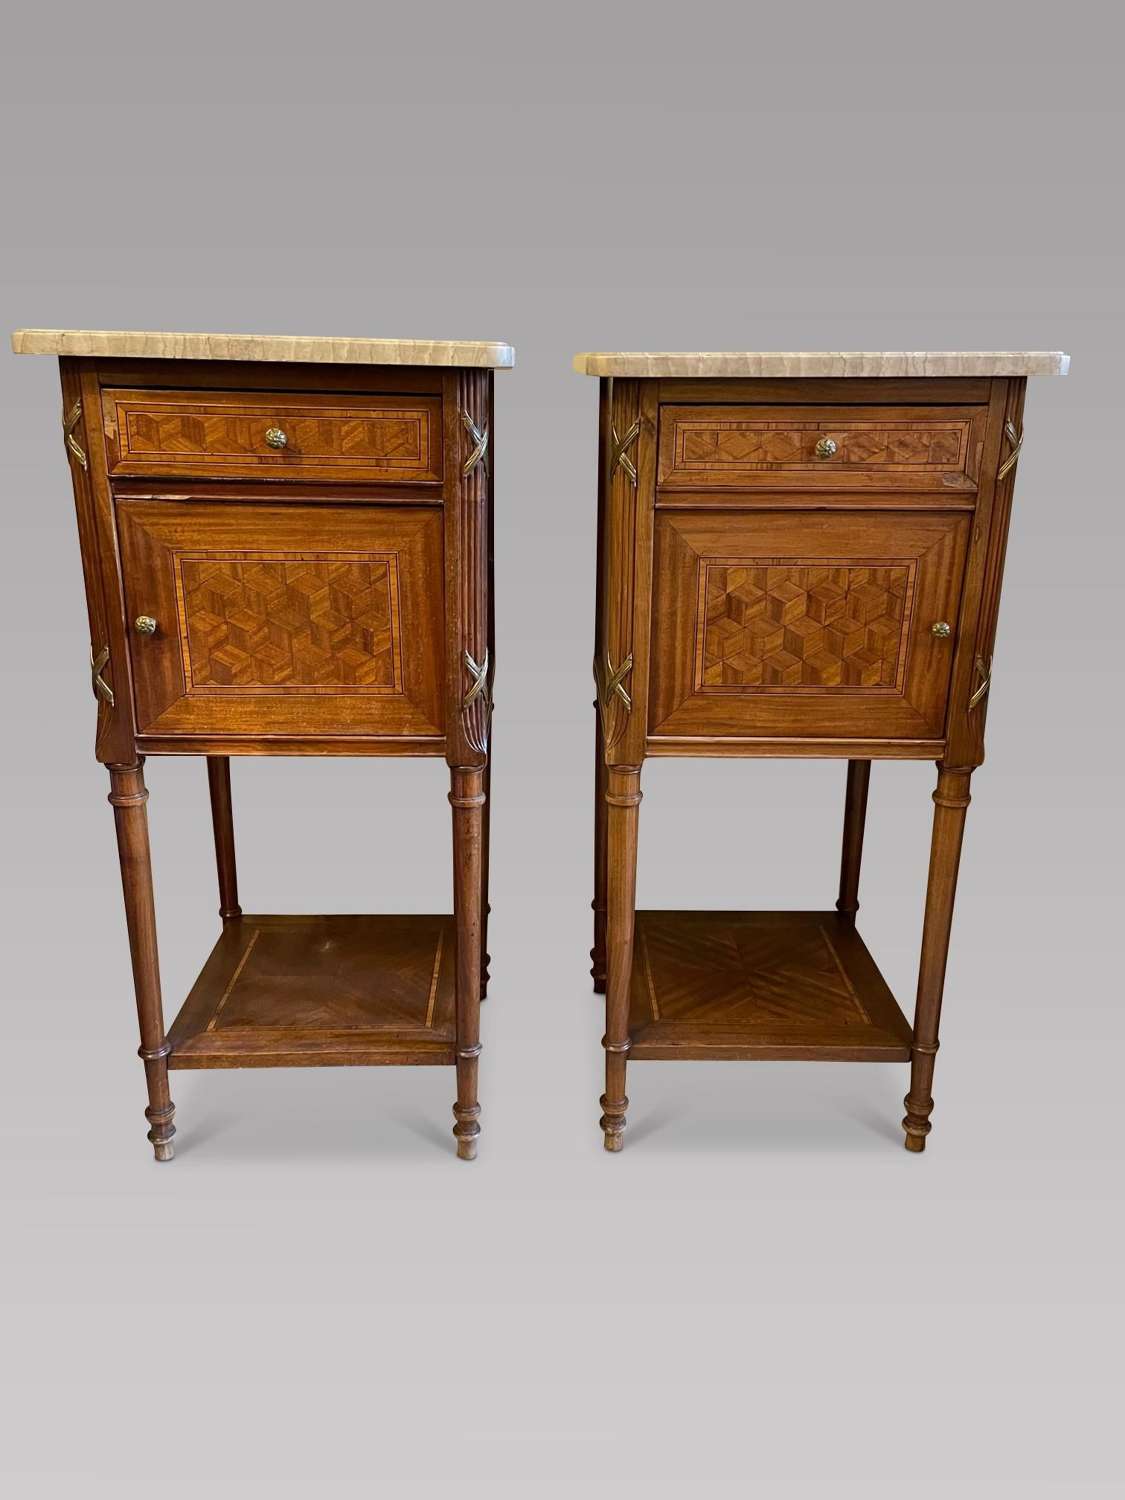 Pair of 19th Century Bedside Tables